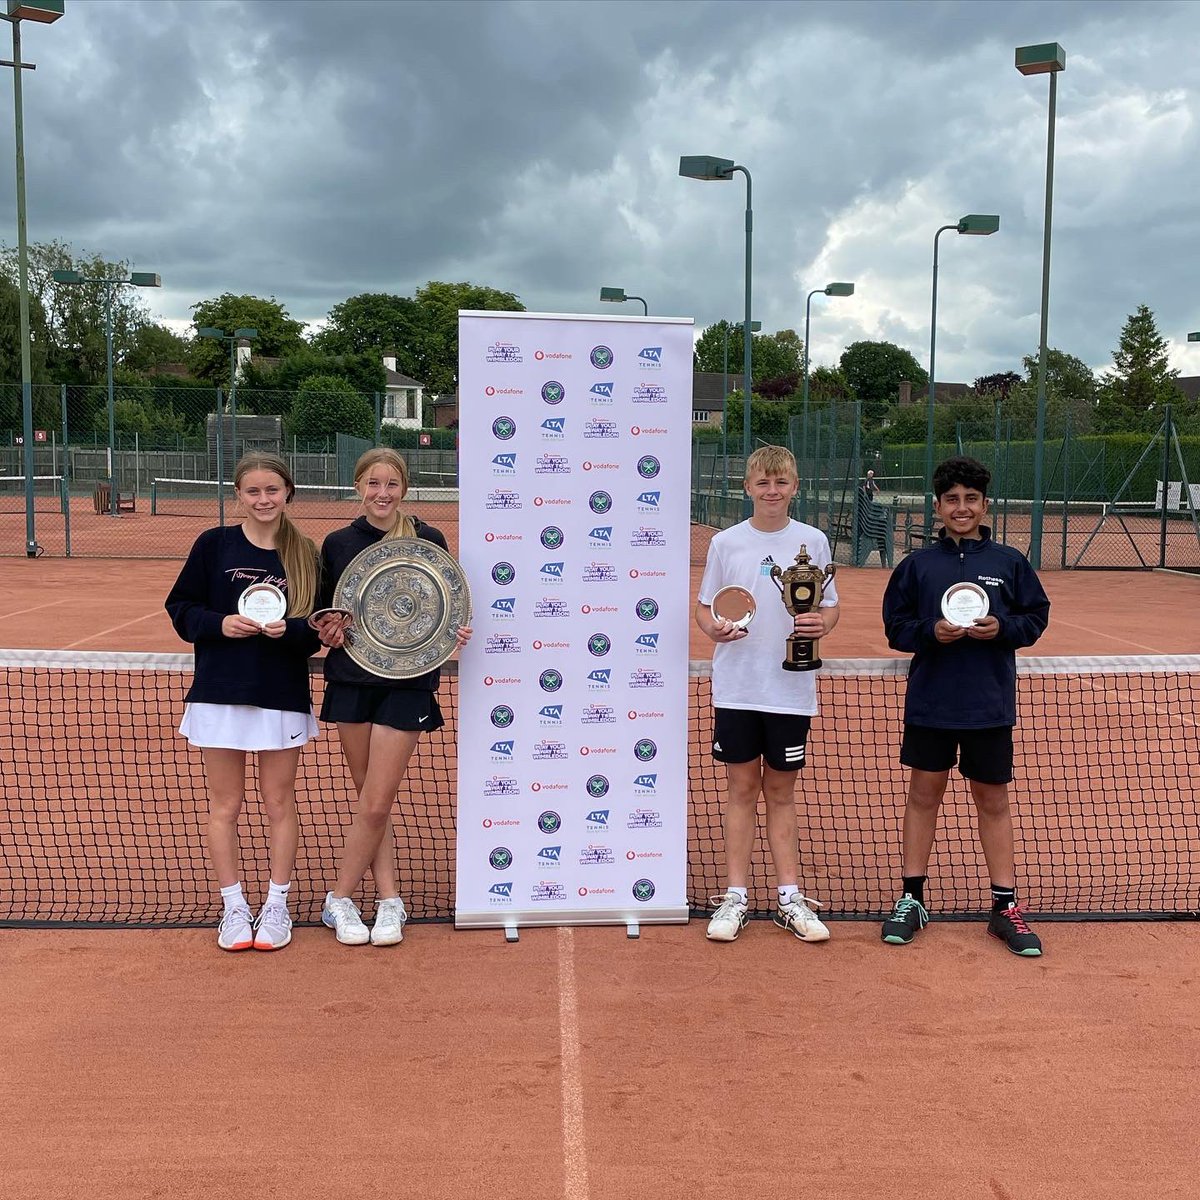 Congratulations to our Play Your Way to Wimbledon Finalists. Jacob winning the boys event and Charlotte the girls event, they both now qualify for the national finals at Wimbledon in August. Well done to Ace and Emily on reaching the final also. @LTACompetitions @VodafoneUK